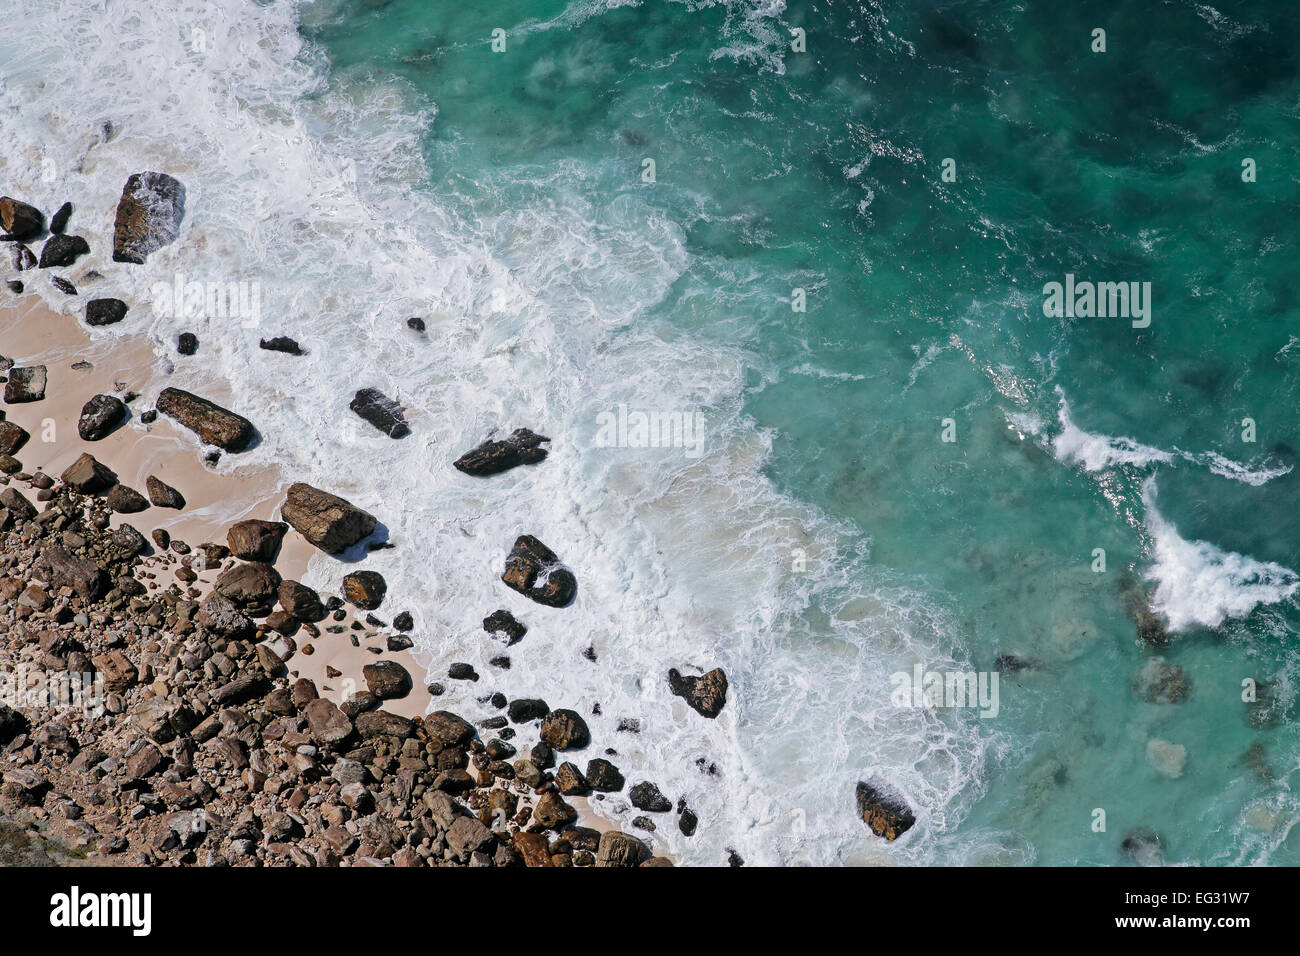 Aerial view of a rocky beach and waves, South Africa Stock Photo